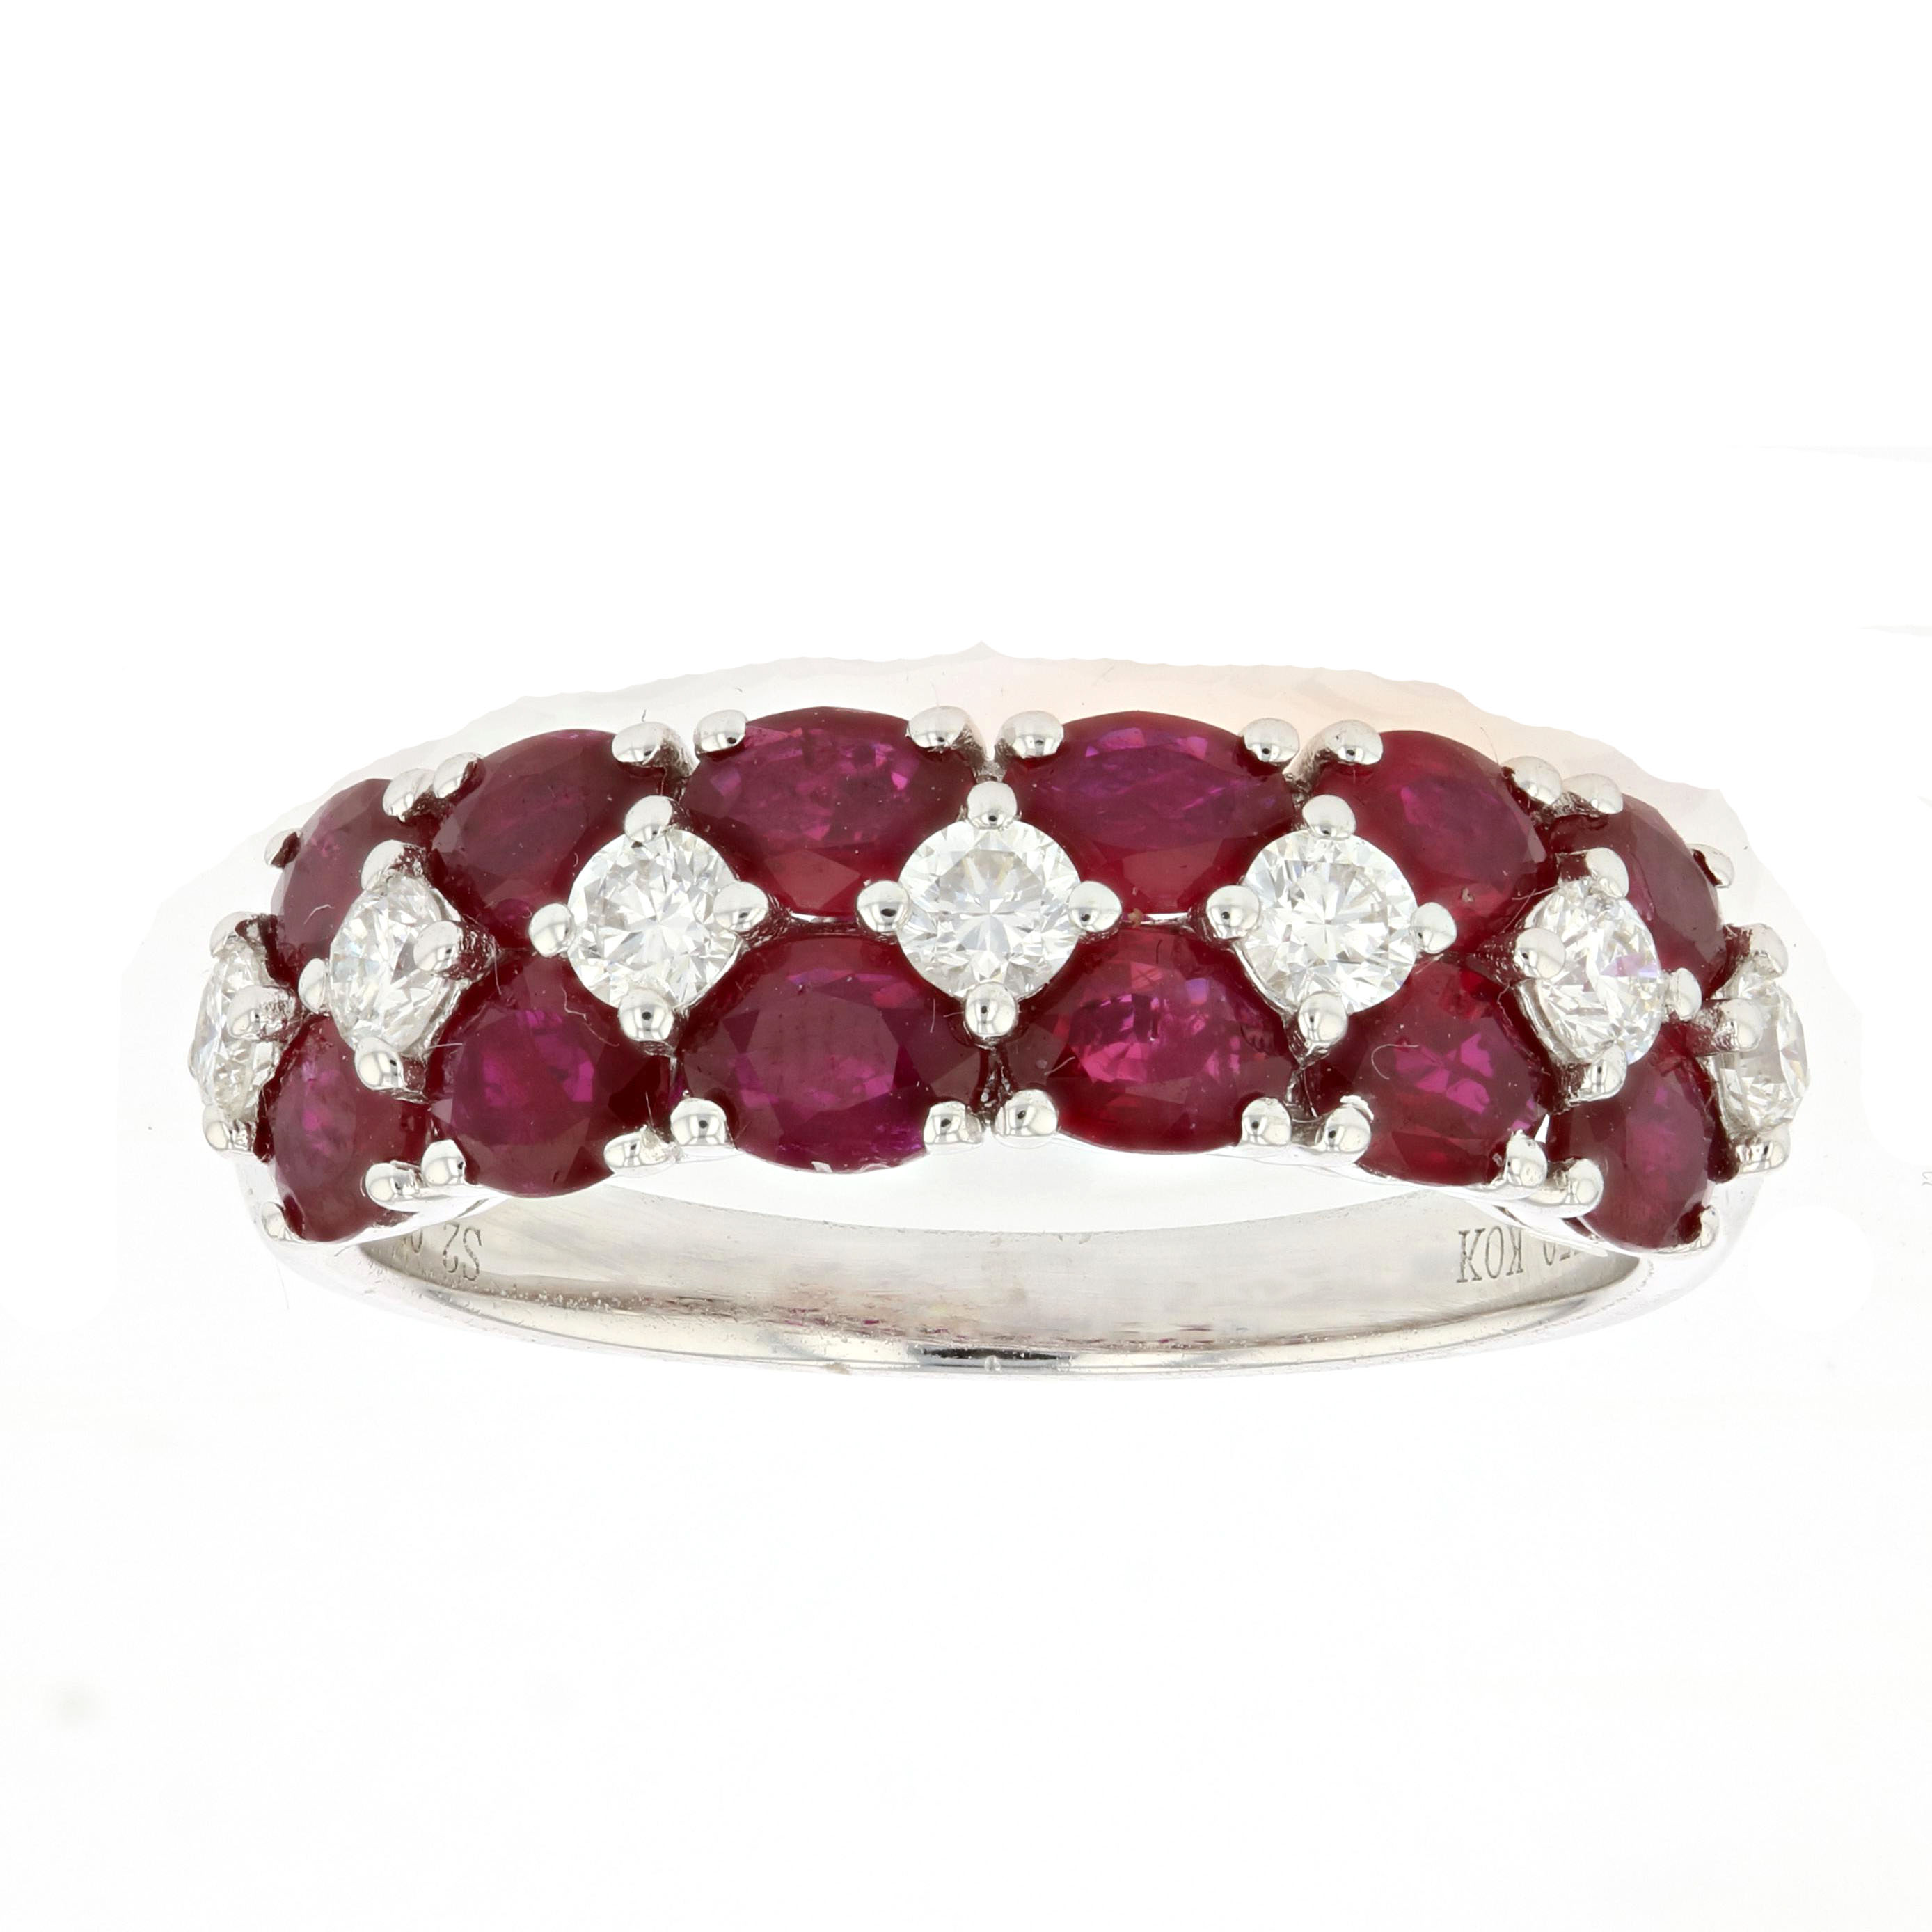 View 2.49ctw Diamond and Ruby Fashion Band in 18k White Gold